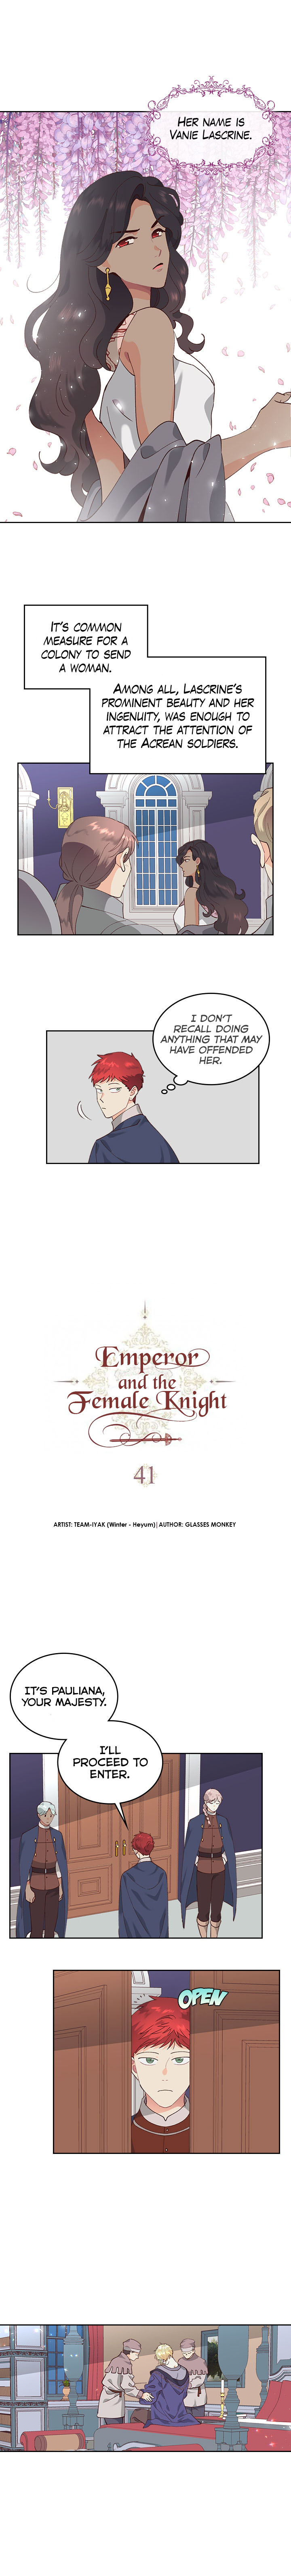 Emperor And The Female Knight Ch. 41